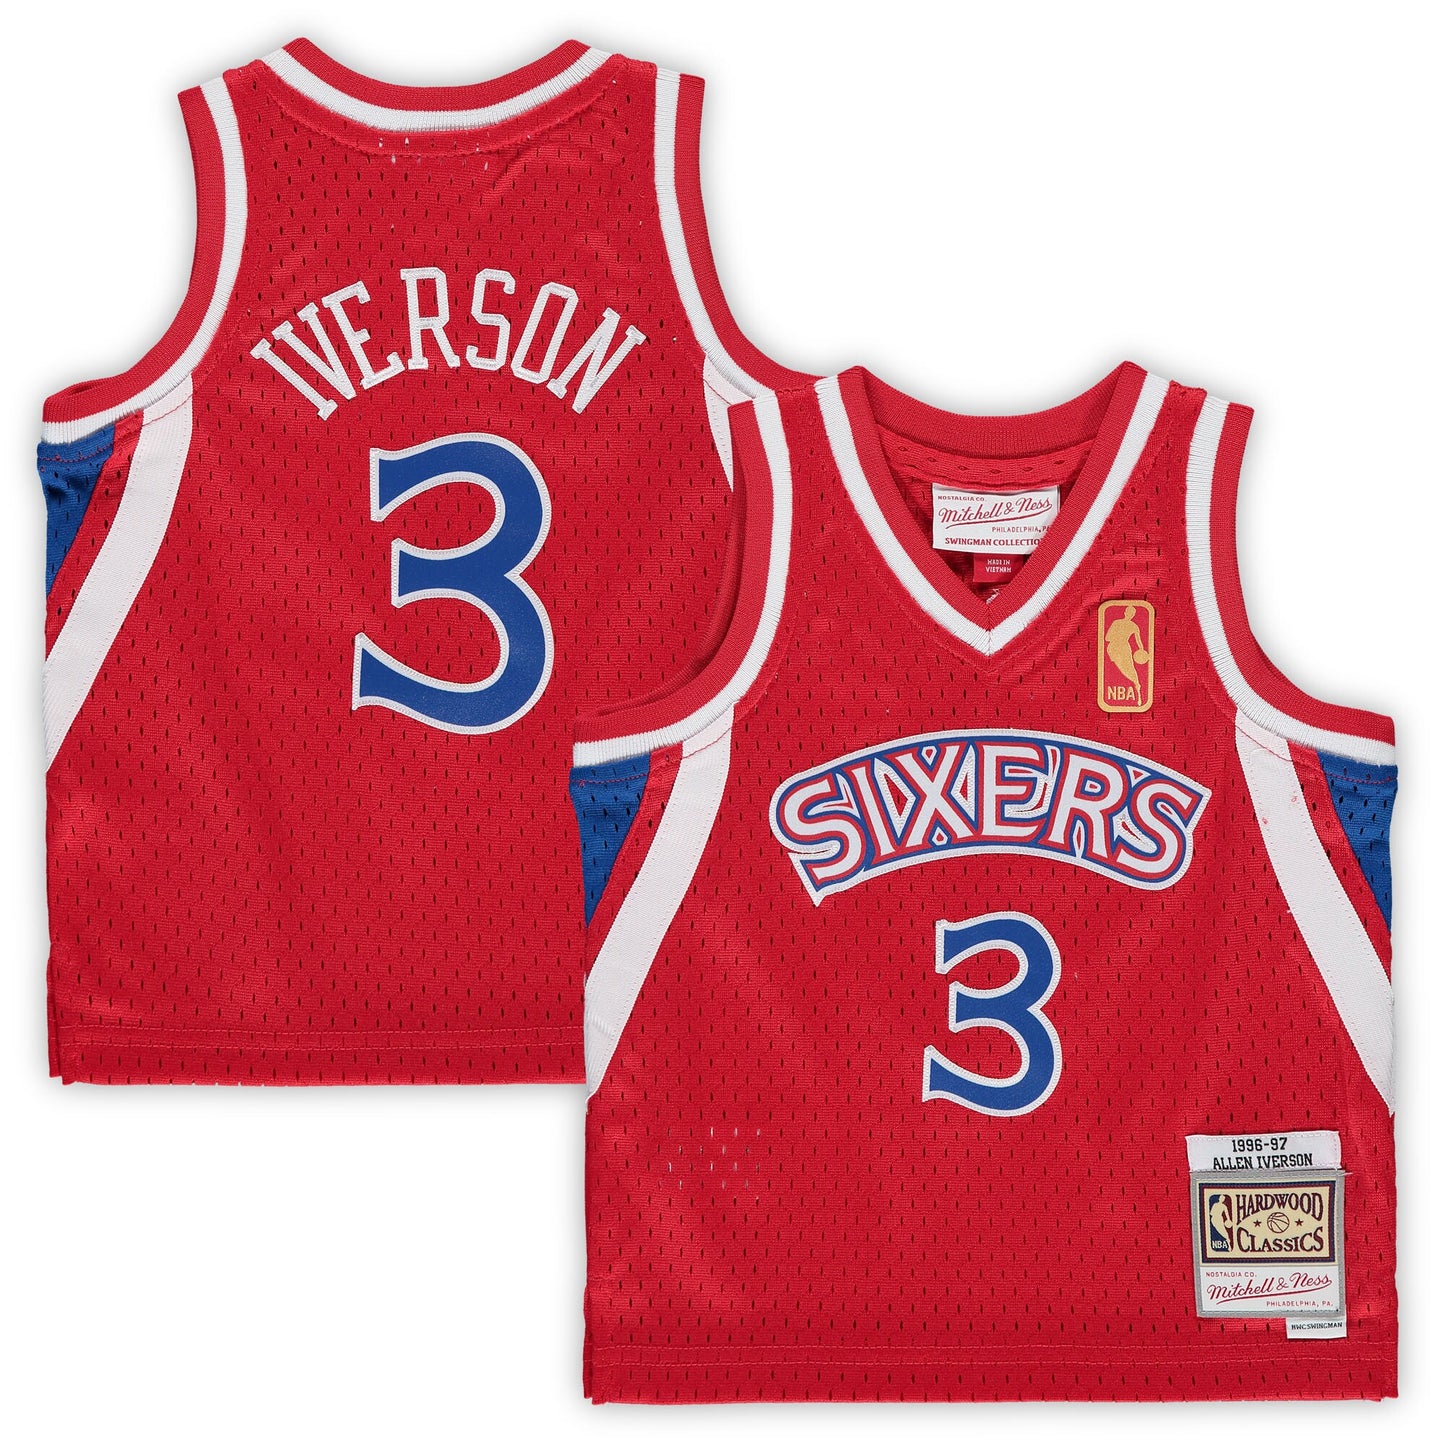 Allen Iverson Philadelphia 76ers Mitchell & Ness Infant 1996/97 Hardwood Classics Retired Player Jersey - Red